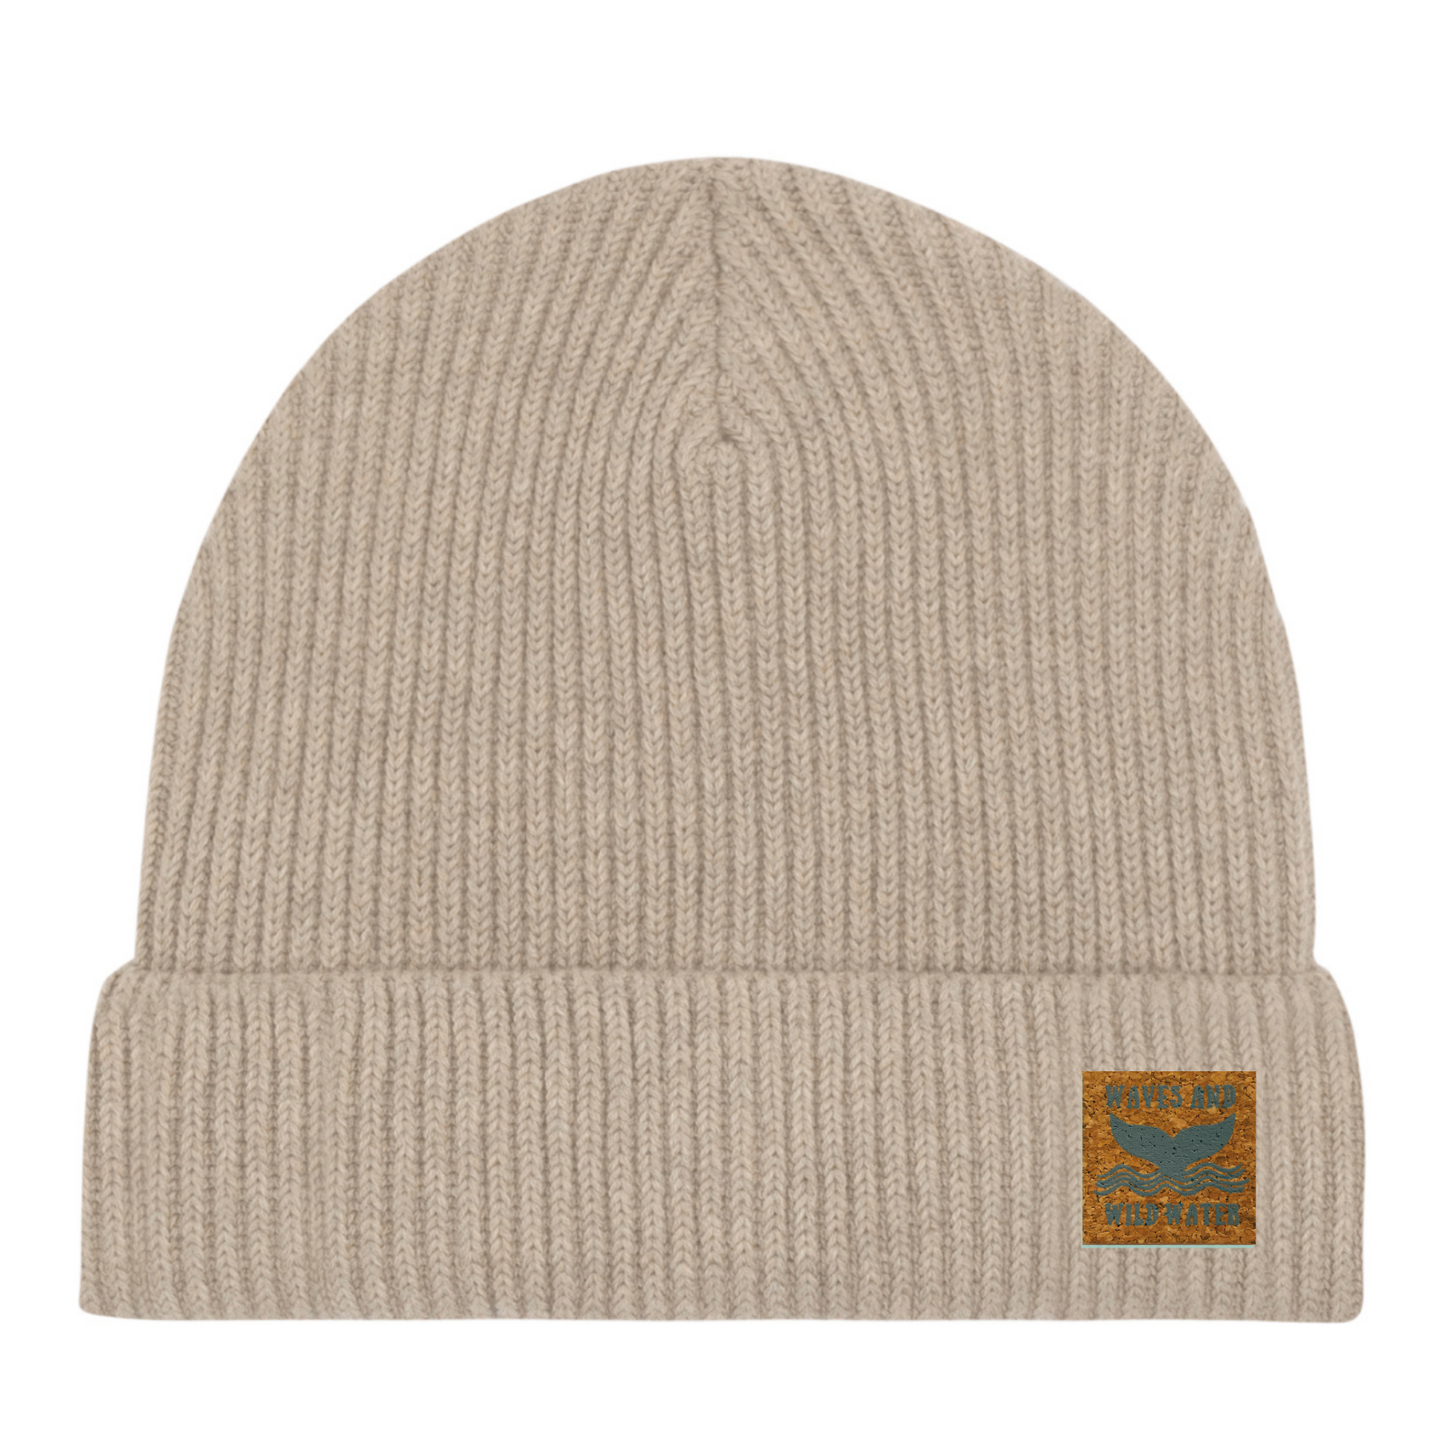 An oatmeal coloured fisherman beanie hat with a Waves & Wild Water label. 